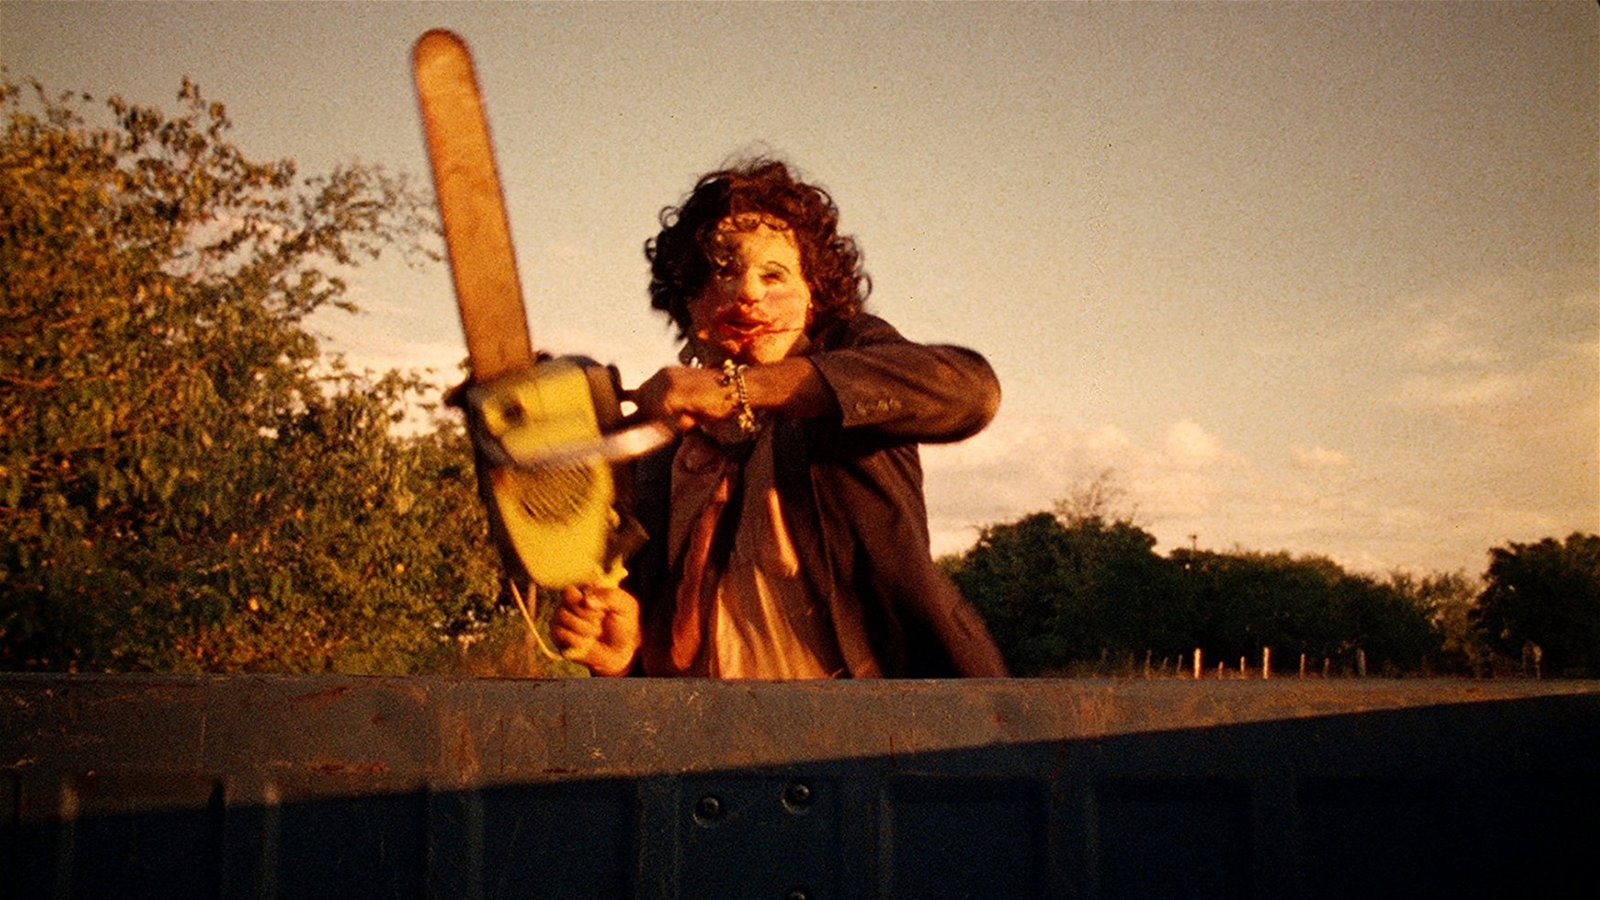 The Top 10: Ranking The Texas Chainsaw Massacre Franchise